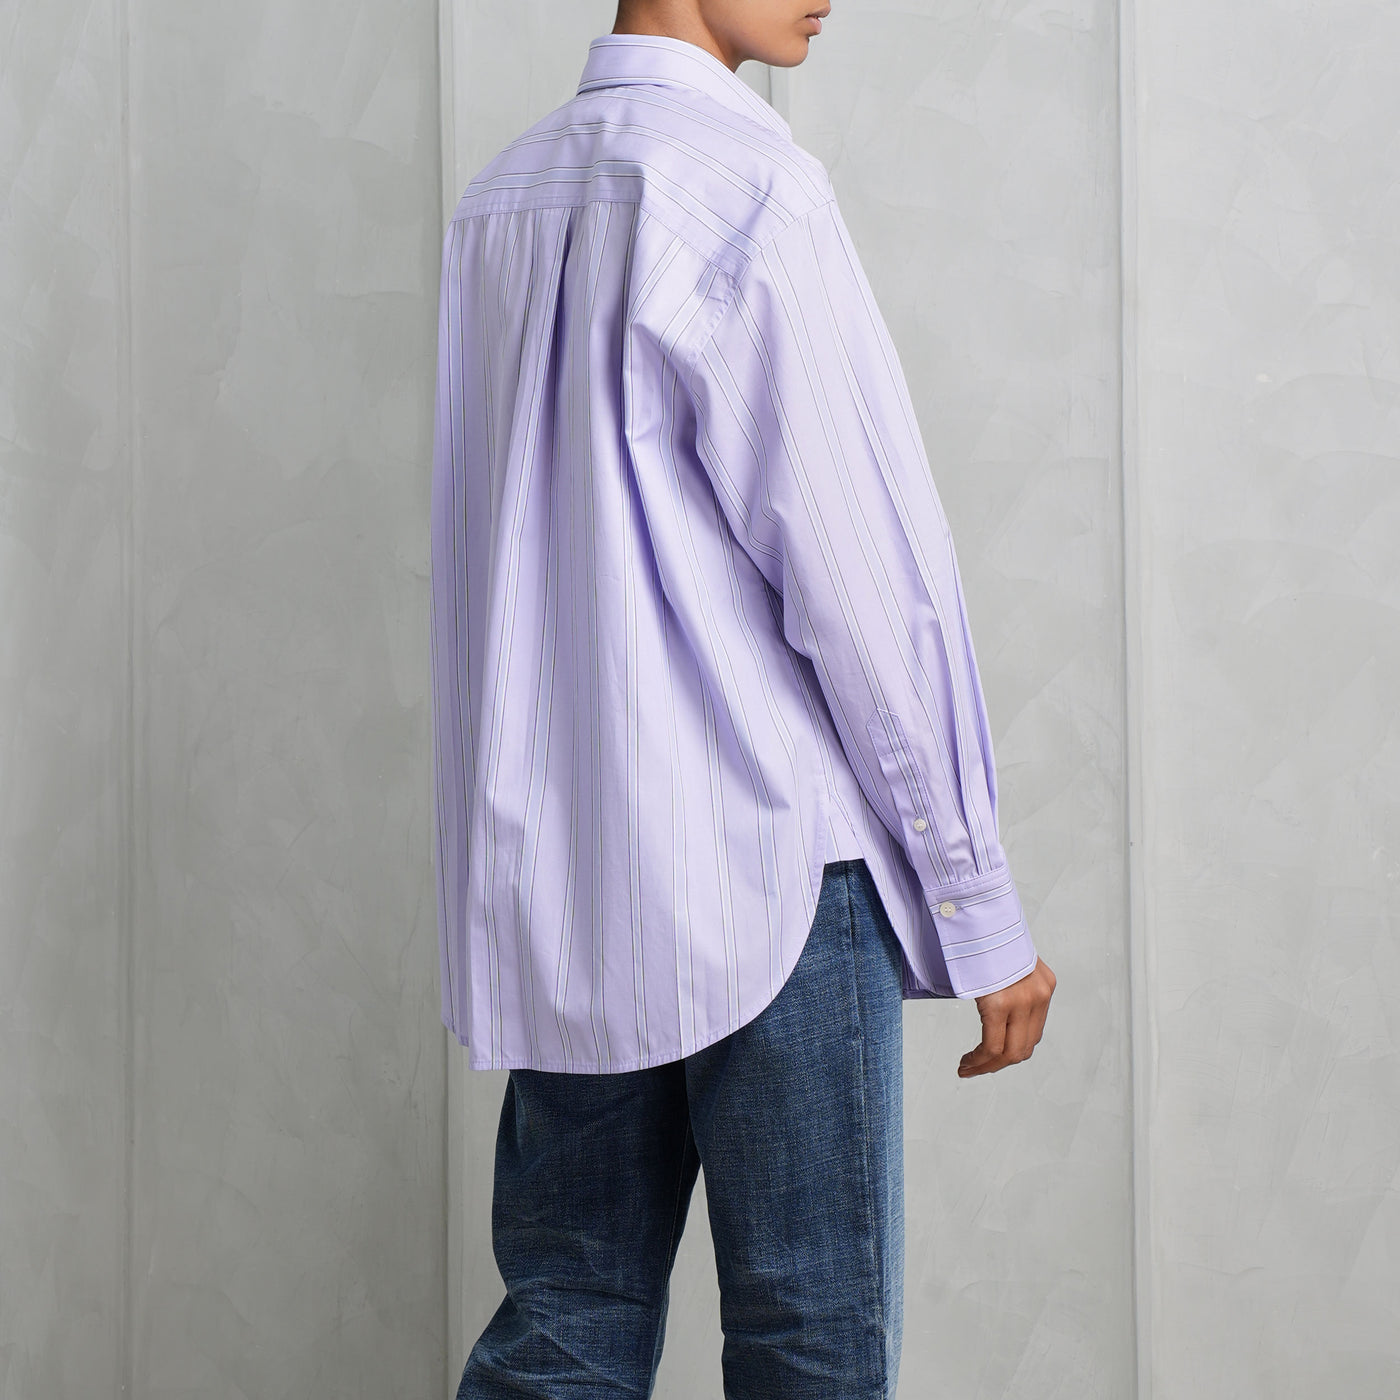 Oversized Mens Shirt Victoria Beckham Relaxed Fit 